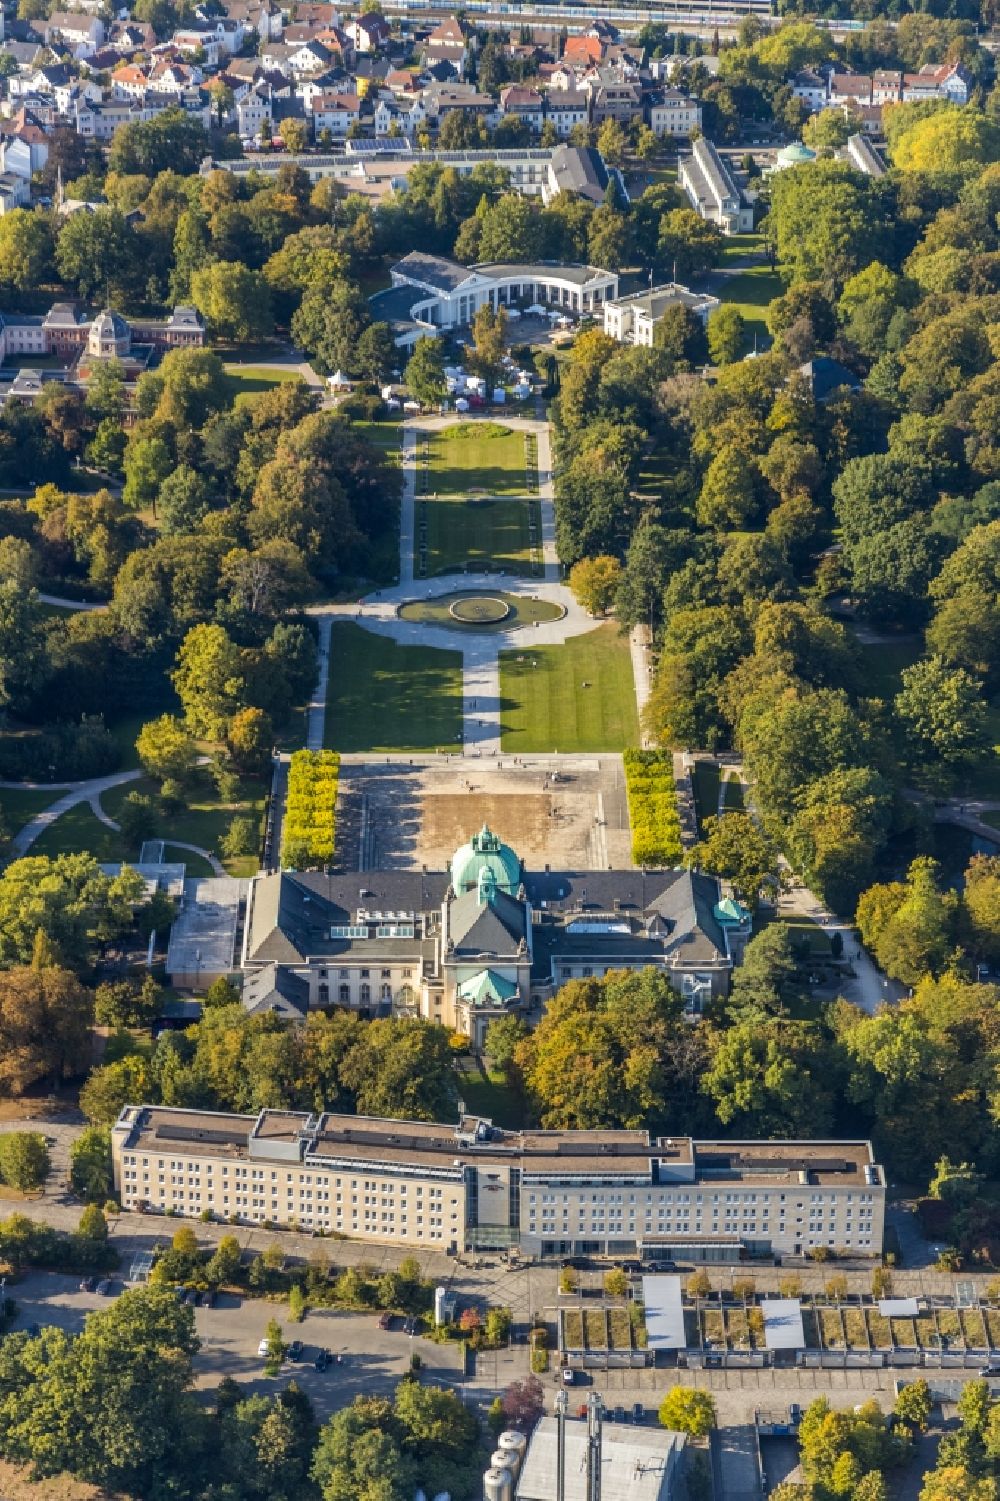 Aerial image Bad Oeynhausen - Building of the Spa and Event house and park of the Staatsbad Bad Oeynhausen with theater and clinic buildings in the district Gohfeld in Bad Oeynhausen in the state North Rhine-Westphalia, Germany